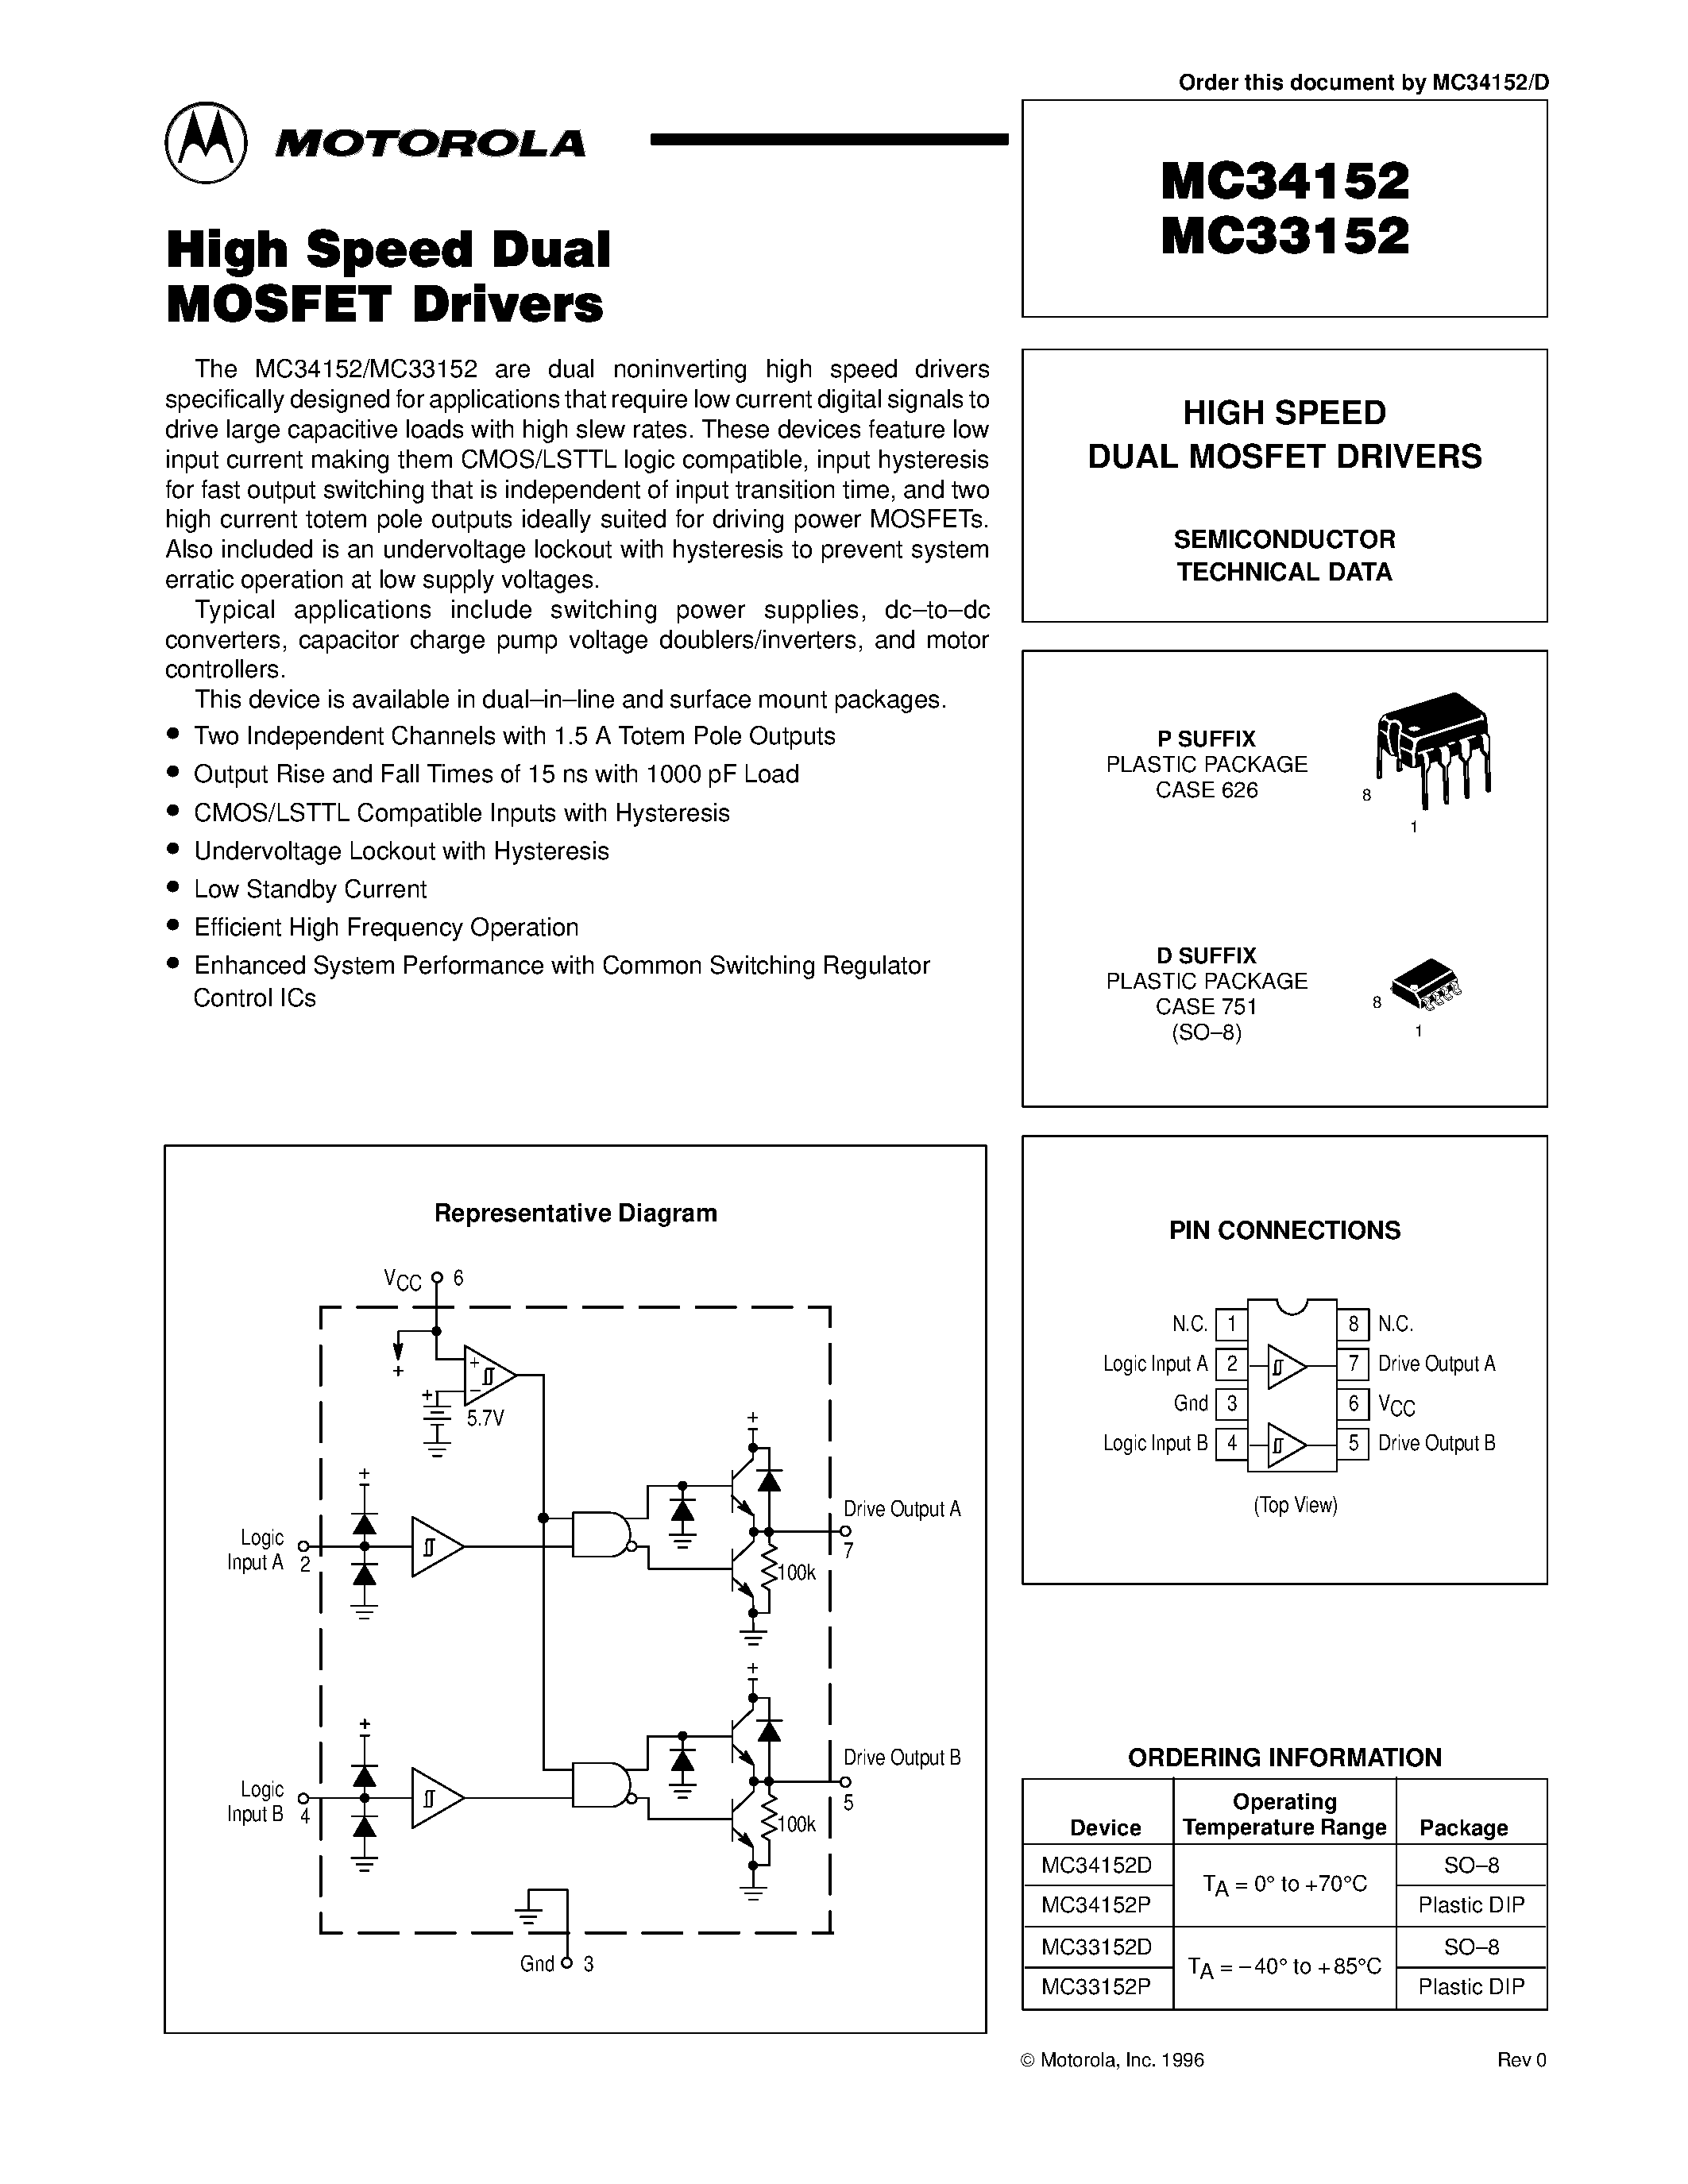 Datasheet MC33152 - HIGH SPEED DUAL MOSFET DRIVERS page 1